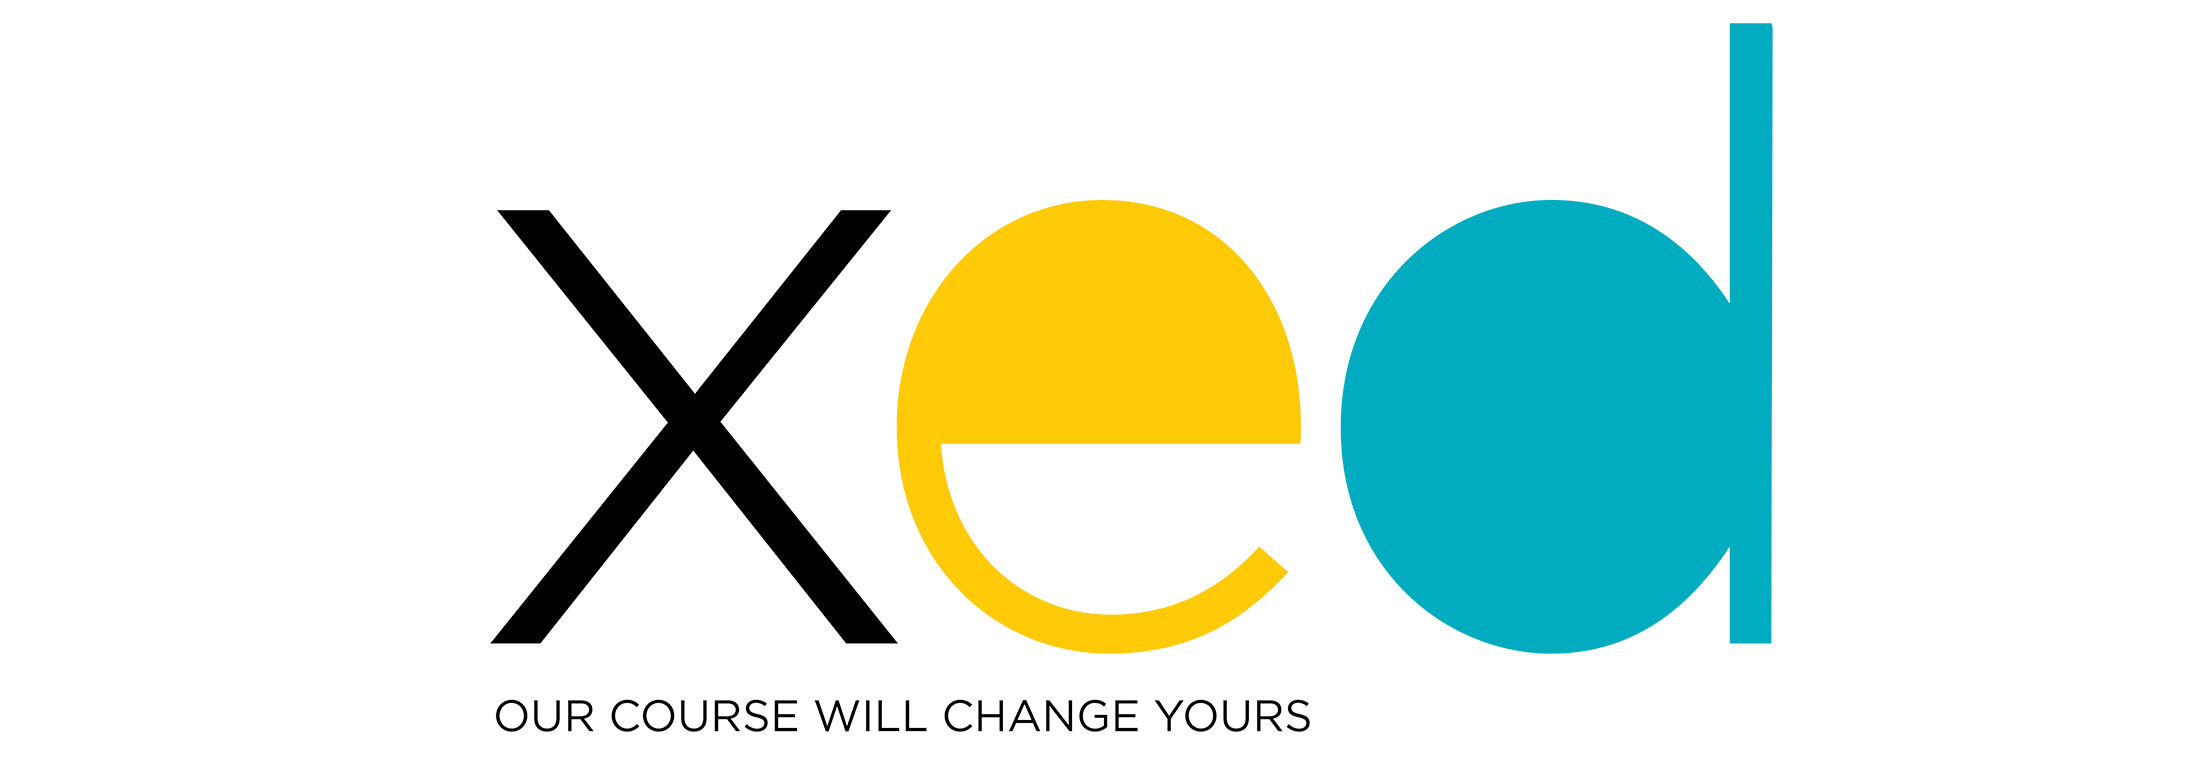 Executive and Corporation Education (XED) logo. Tagline, Our course will change yours.